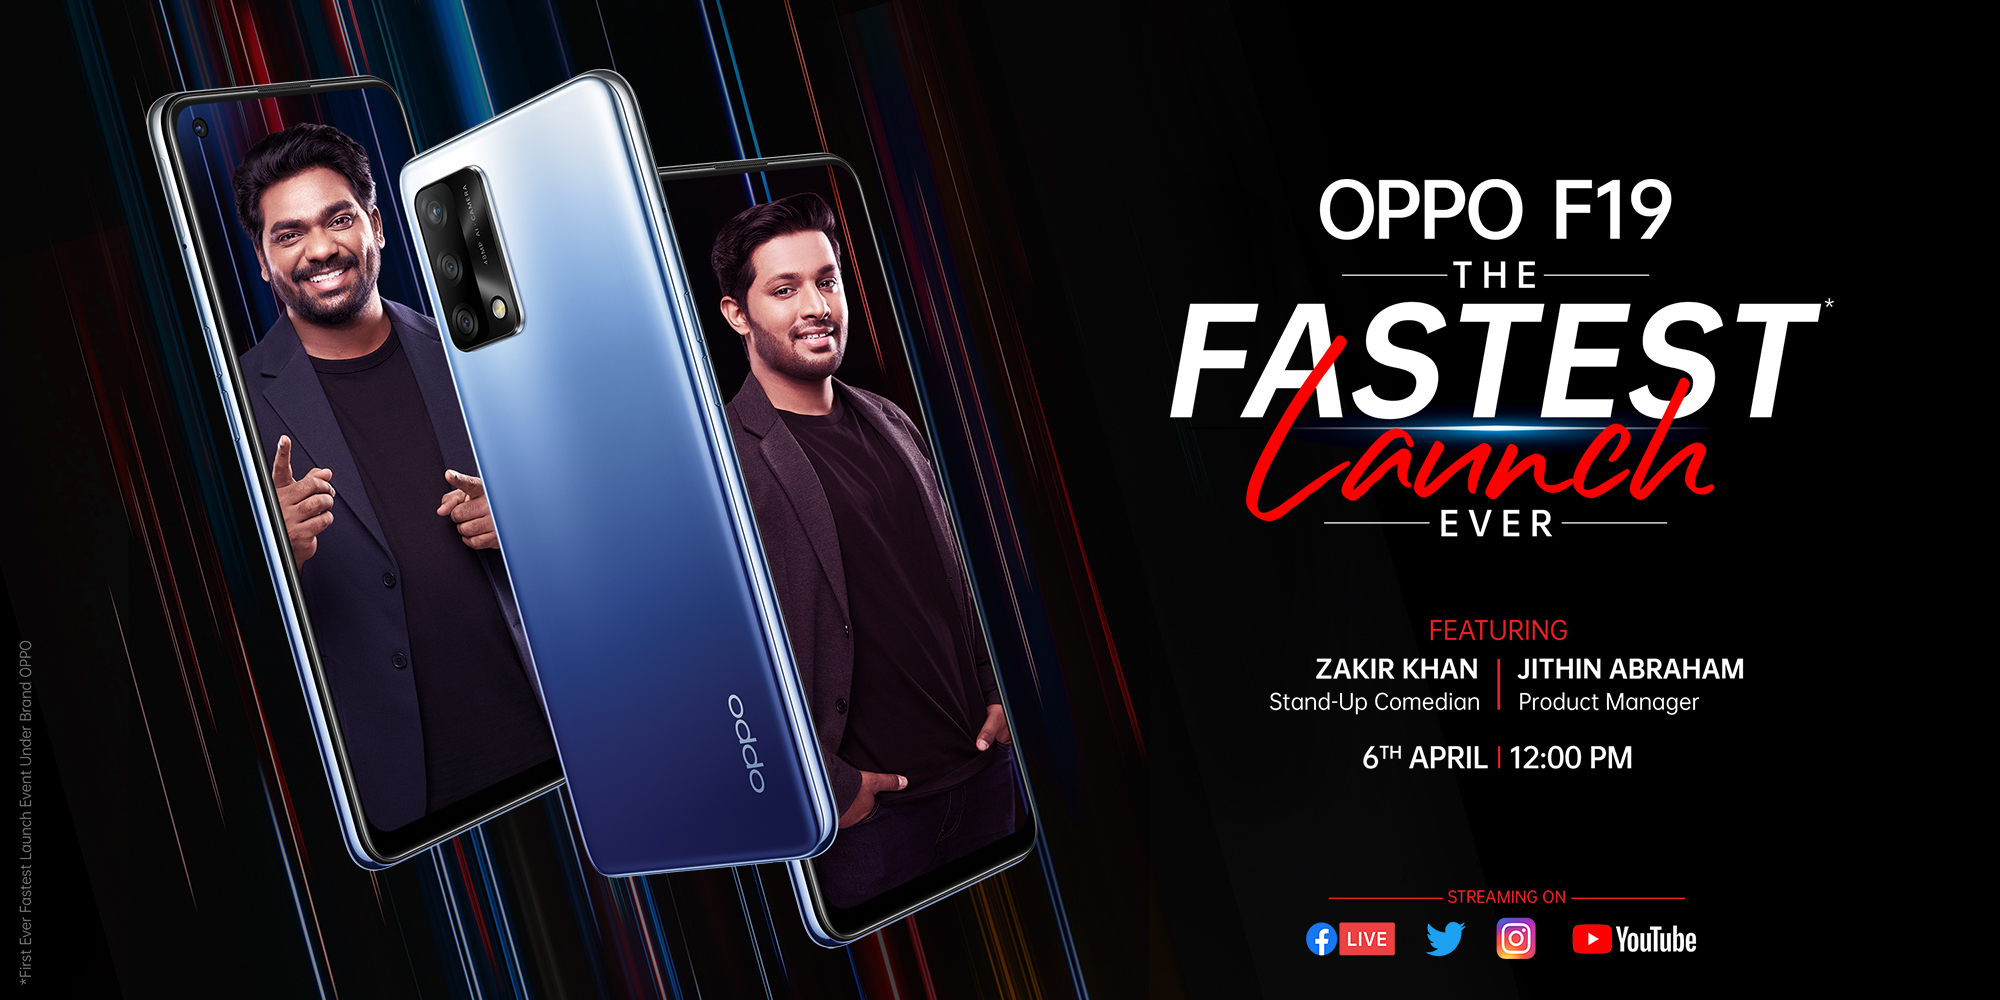 Oppo F19 announced to launch on April 6th